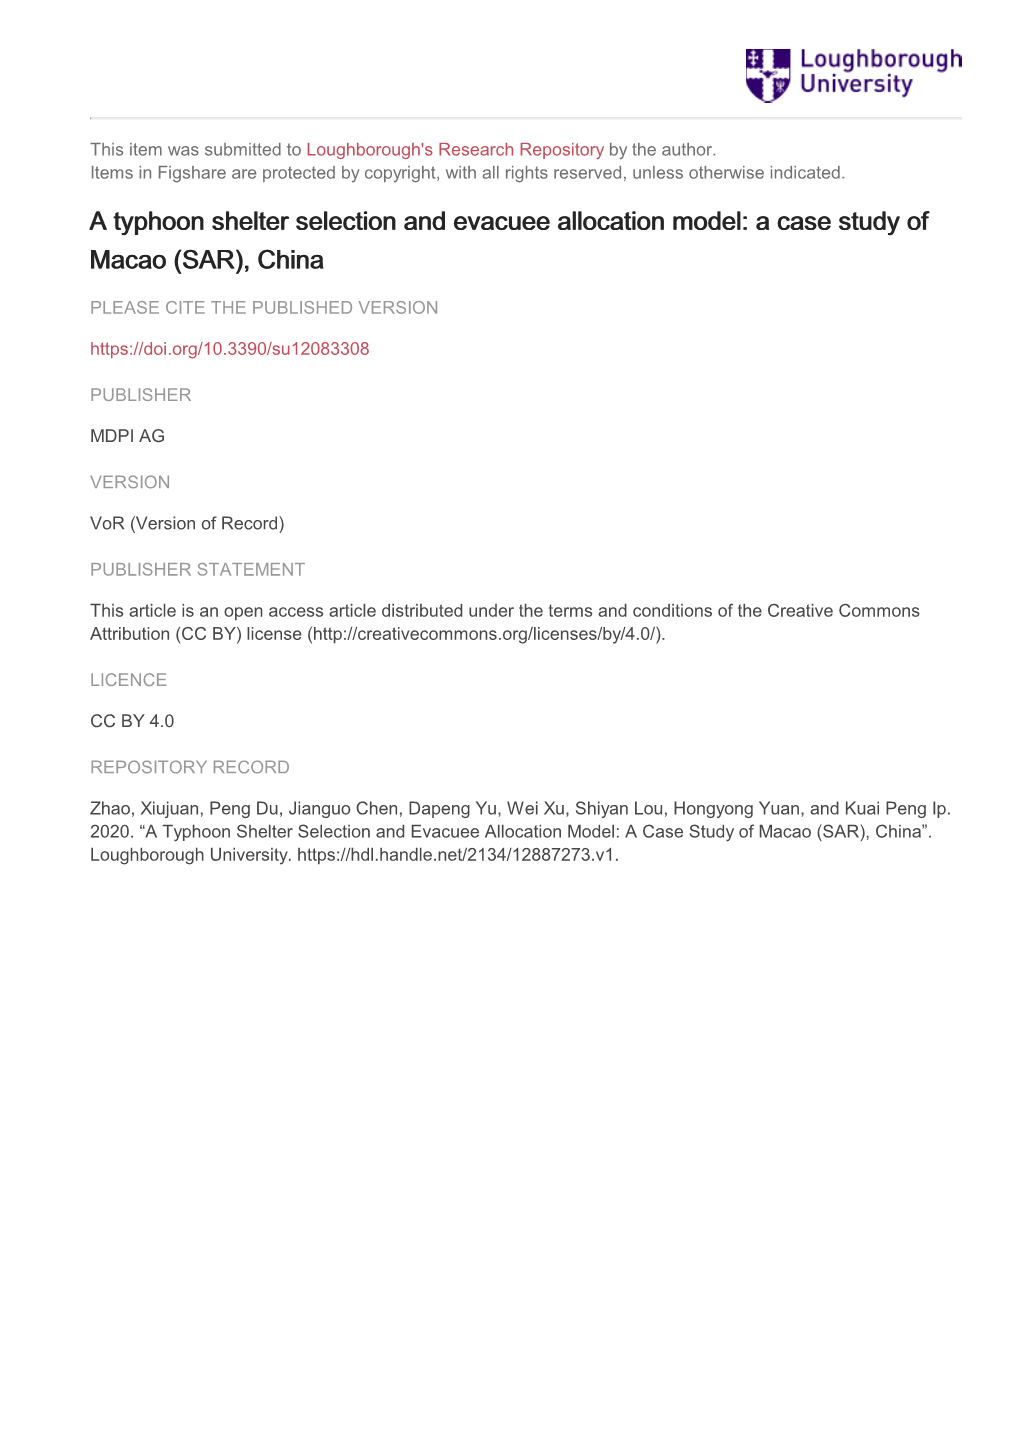 A Typhoon Shelter Selection and Evacuee Allocation Model: a Case Study of Macao (SAR), China